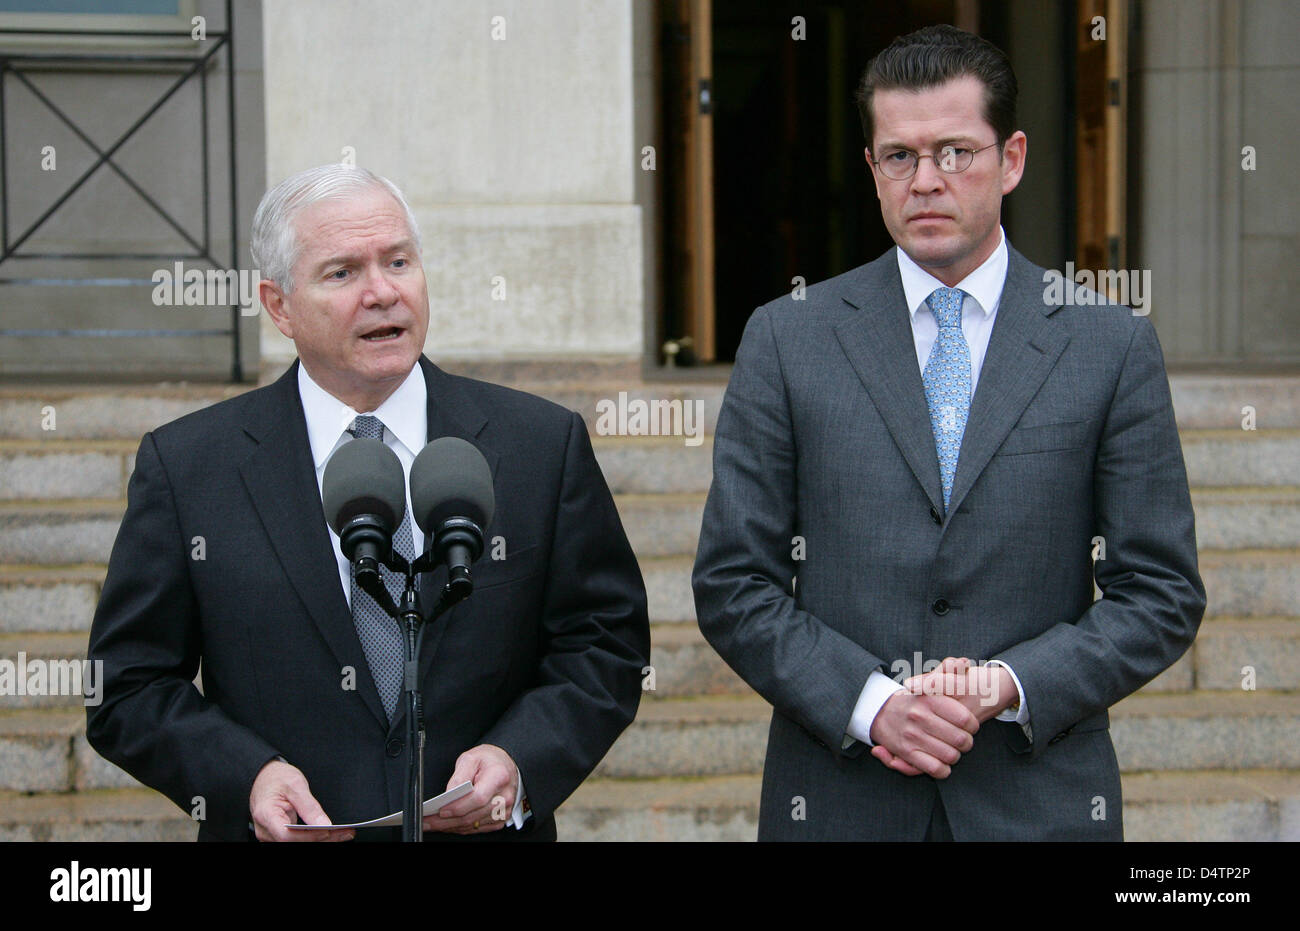 German Defence Minister Karl-Theodor zu Guttenberg (R) and his US counterpart Robert Gates stand next to each other at the US Department of Defense, the Pentagon, in Arlington, USA, 19 November 2009. The two politicians met for bilateral talks. Guttenberg makes inaugural visits to Paris and Washington at the moment. Photo: Michael Mandt Stock Photo